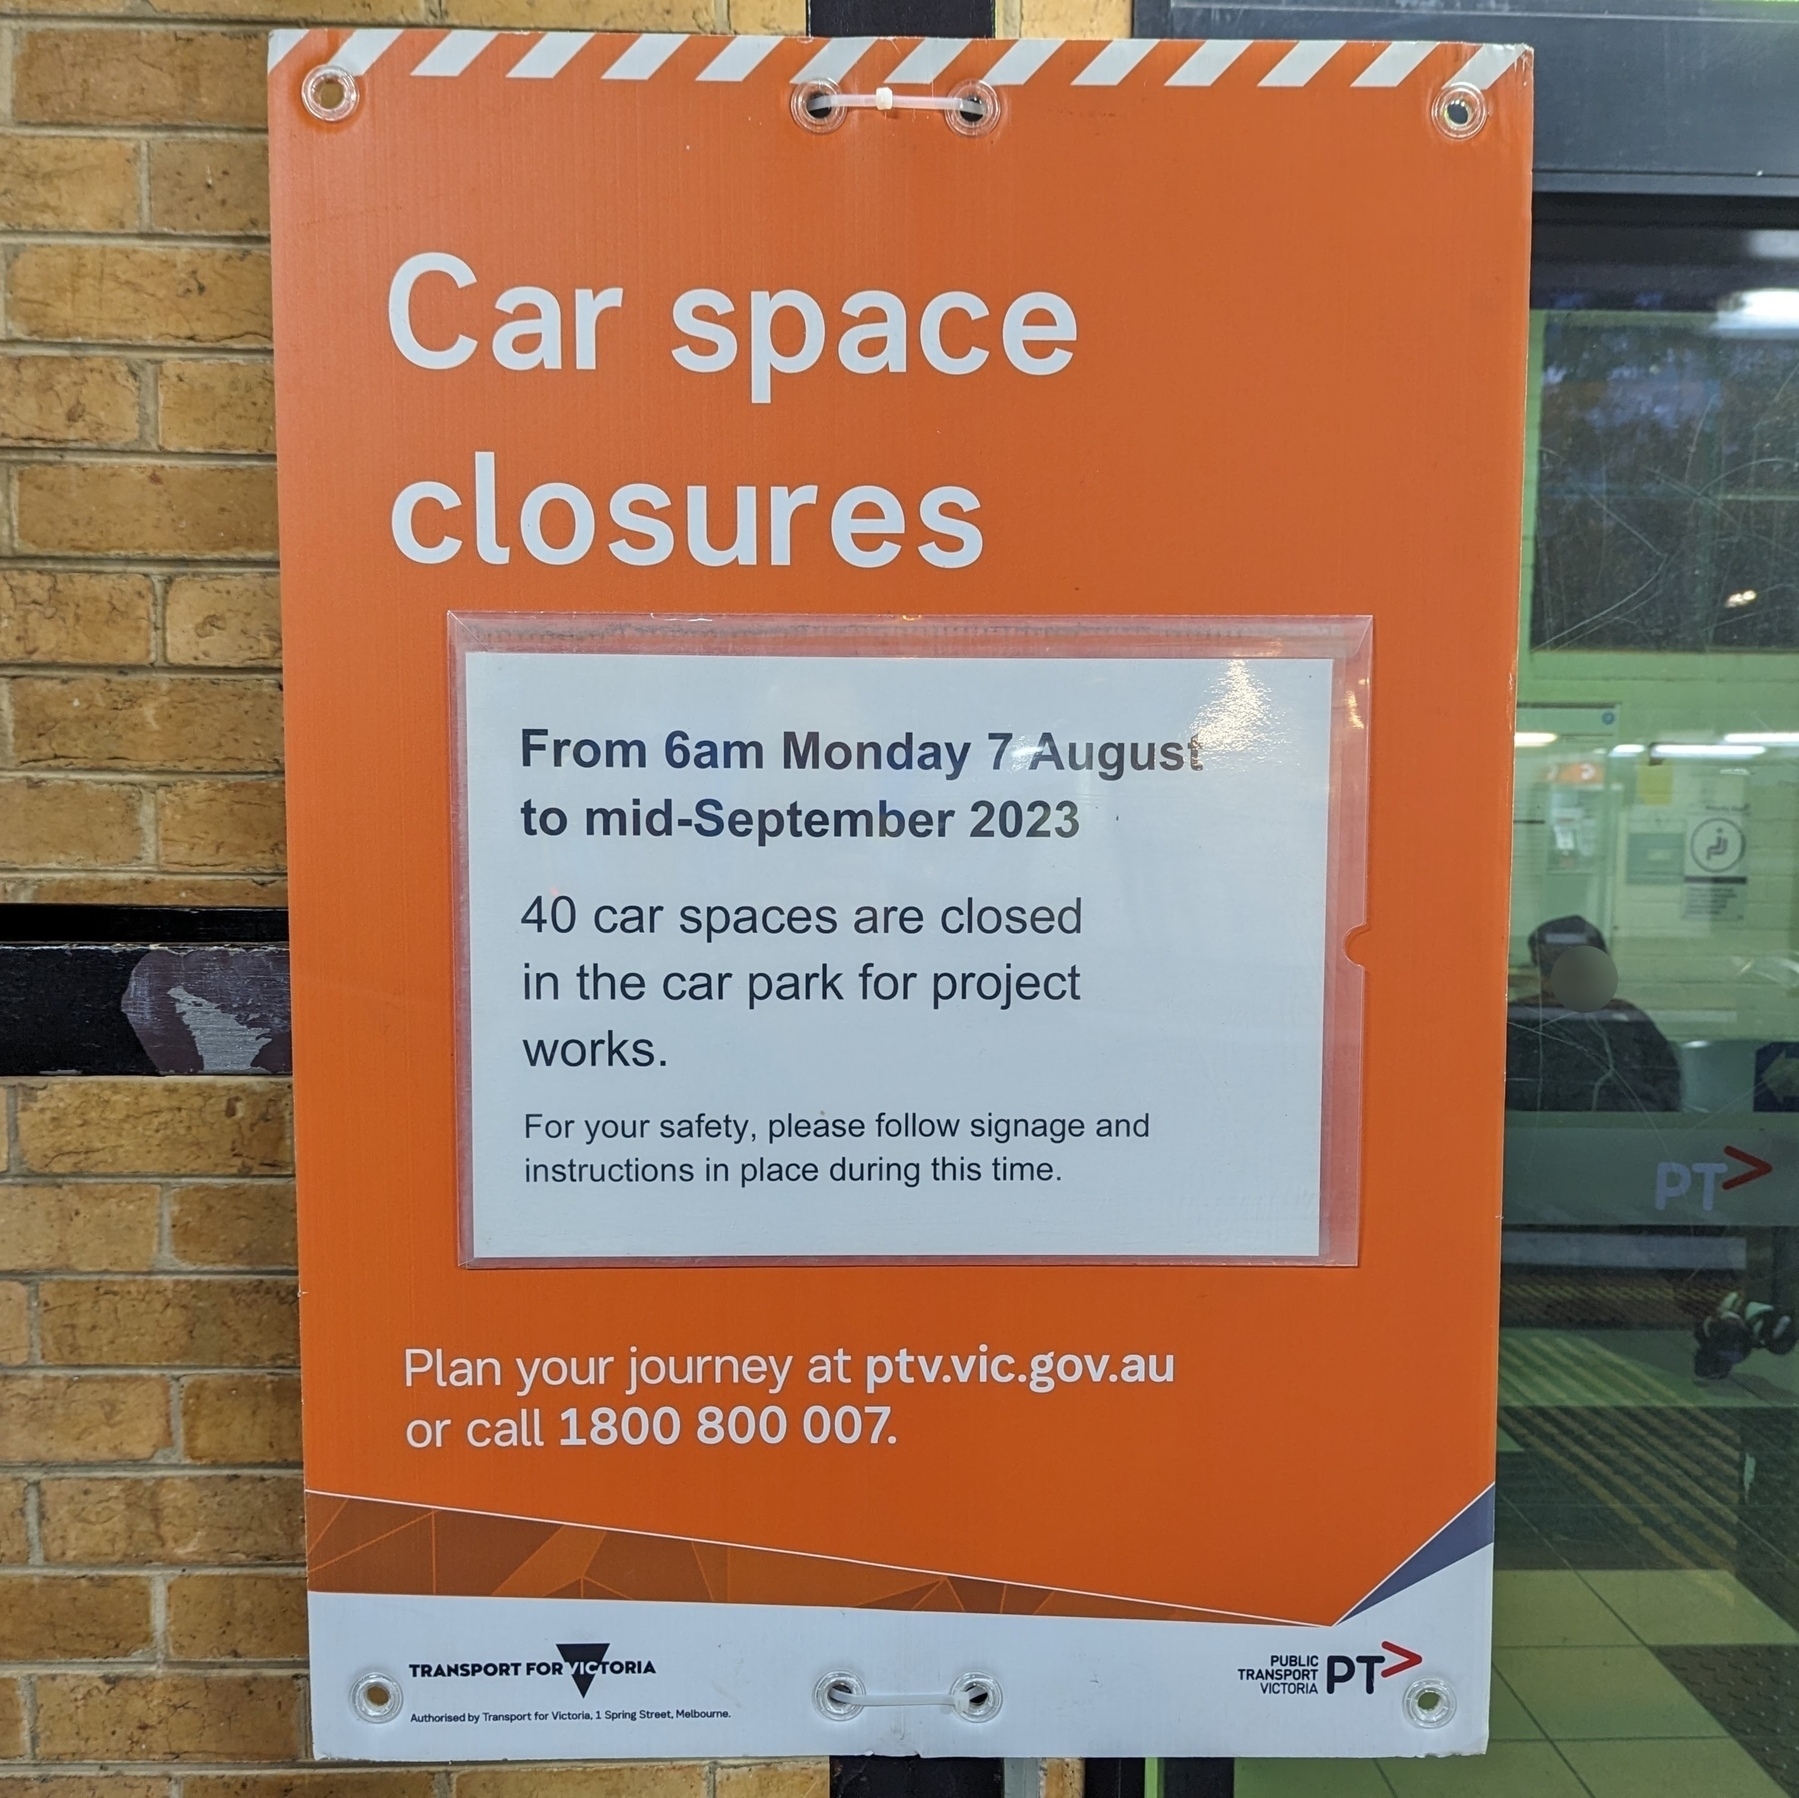 A large orange sign that reads 'Car space closures', along with details of when the car park will be closed and how many spaces would no longer be available